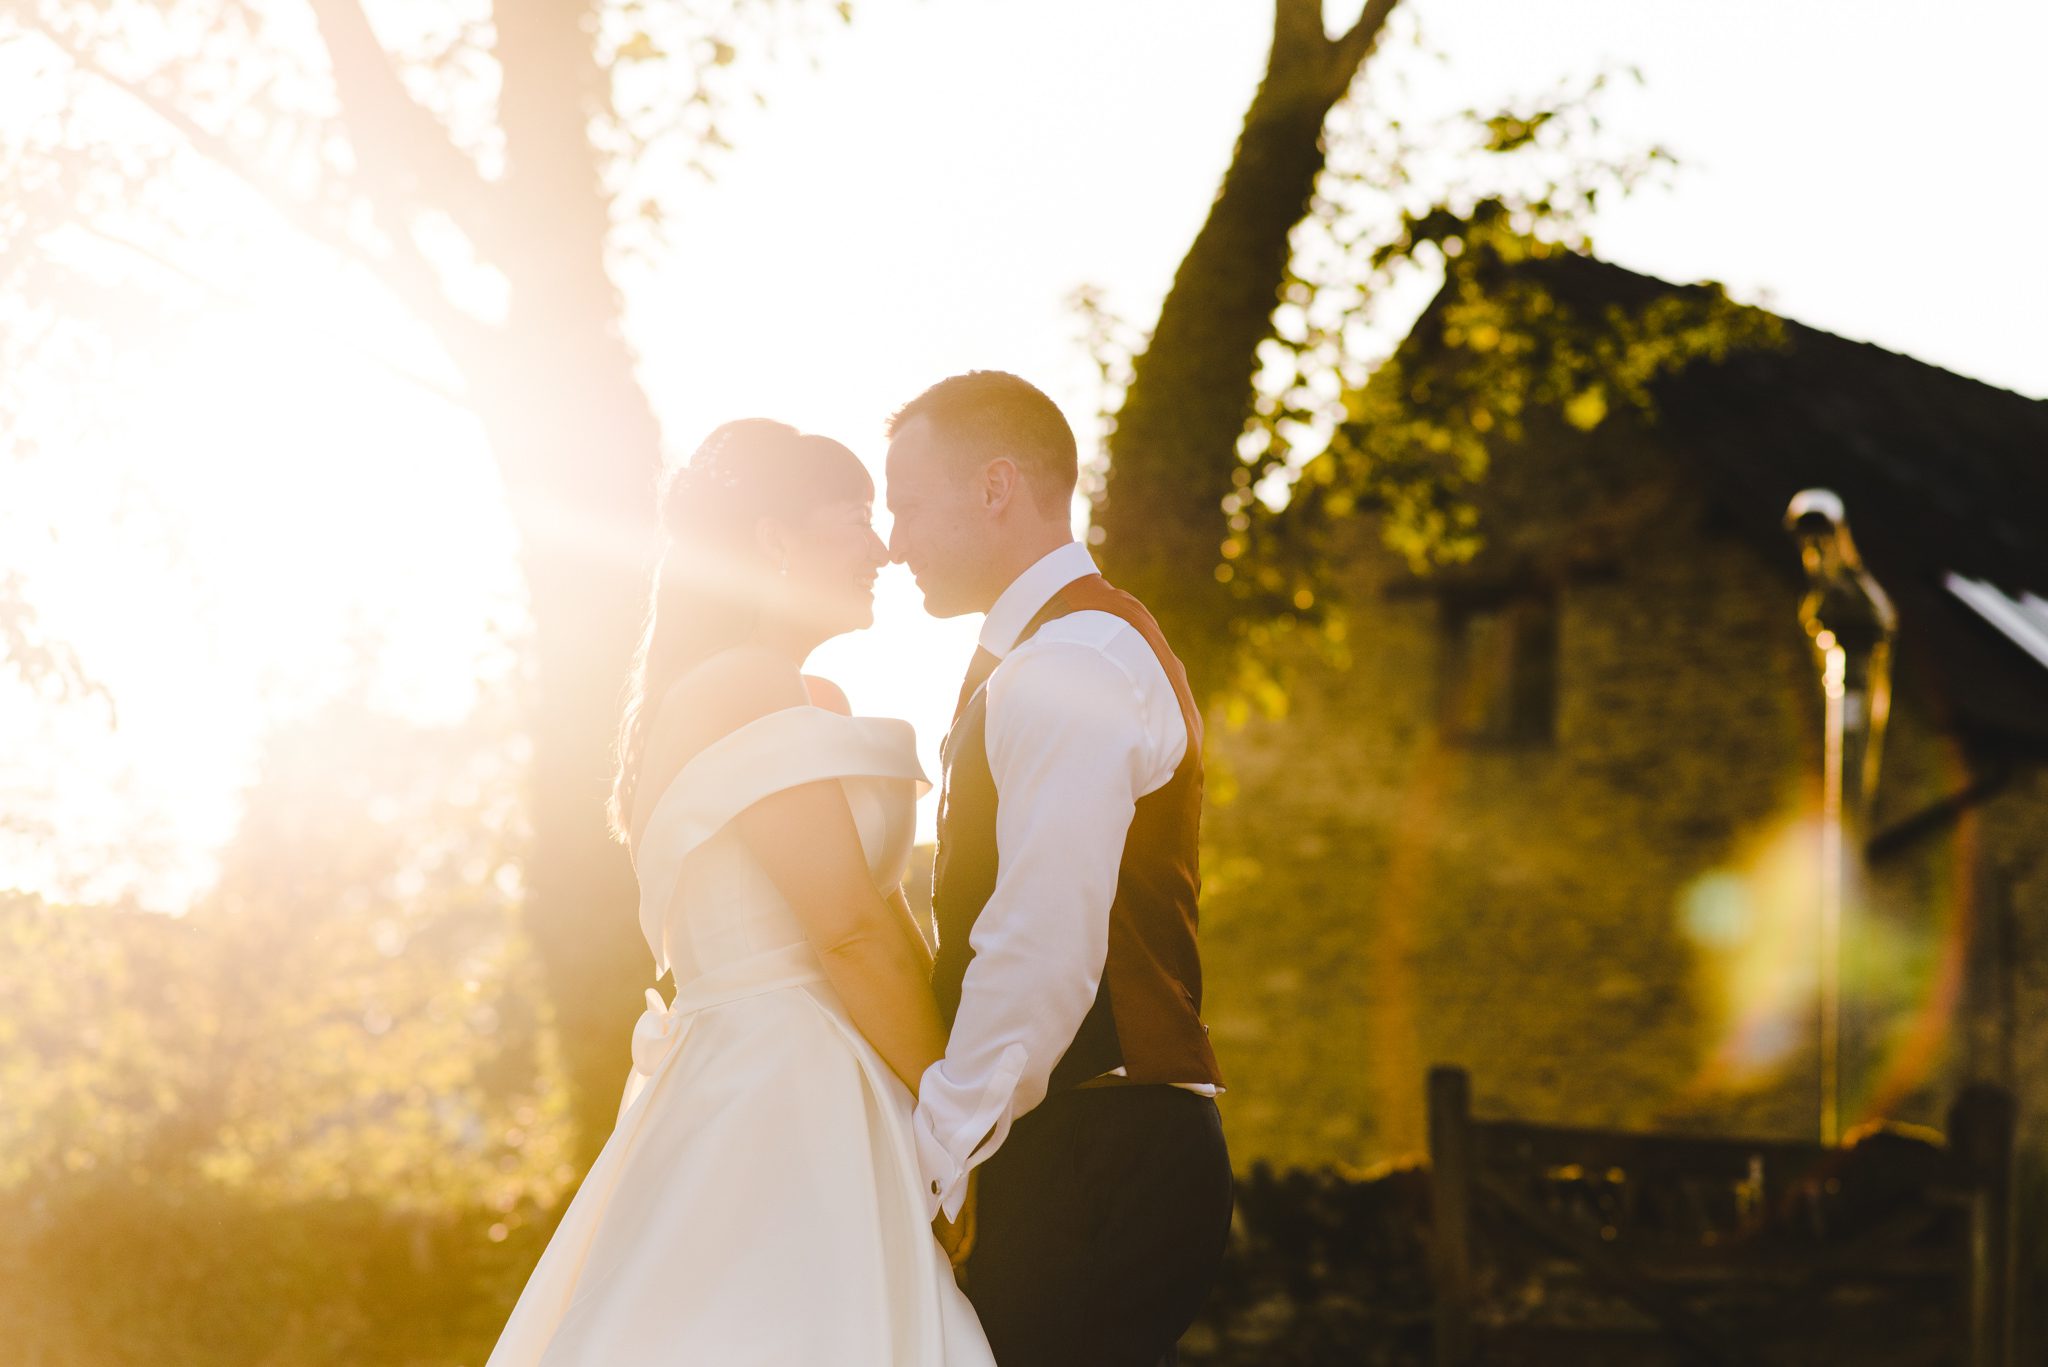 A bride and groom in Oxfordshire photographed at sunset